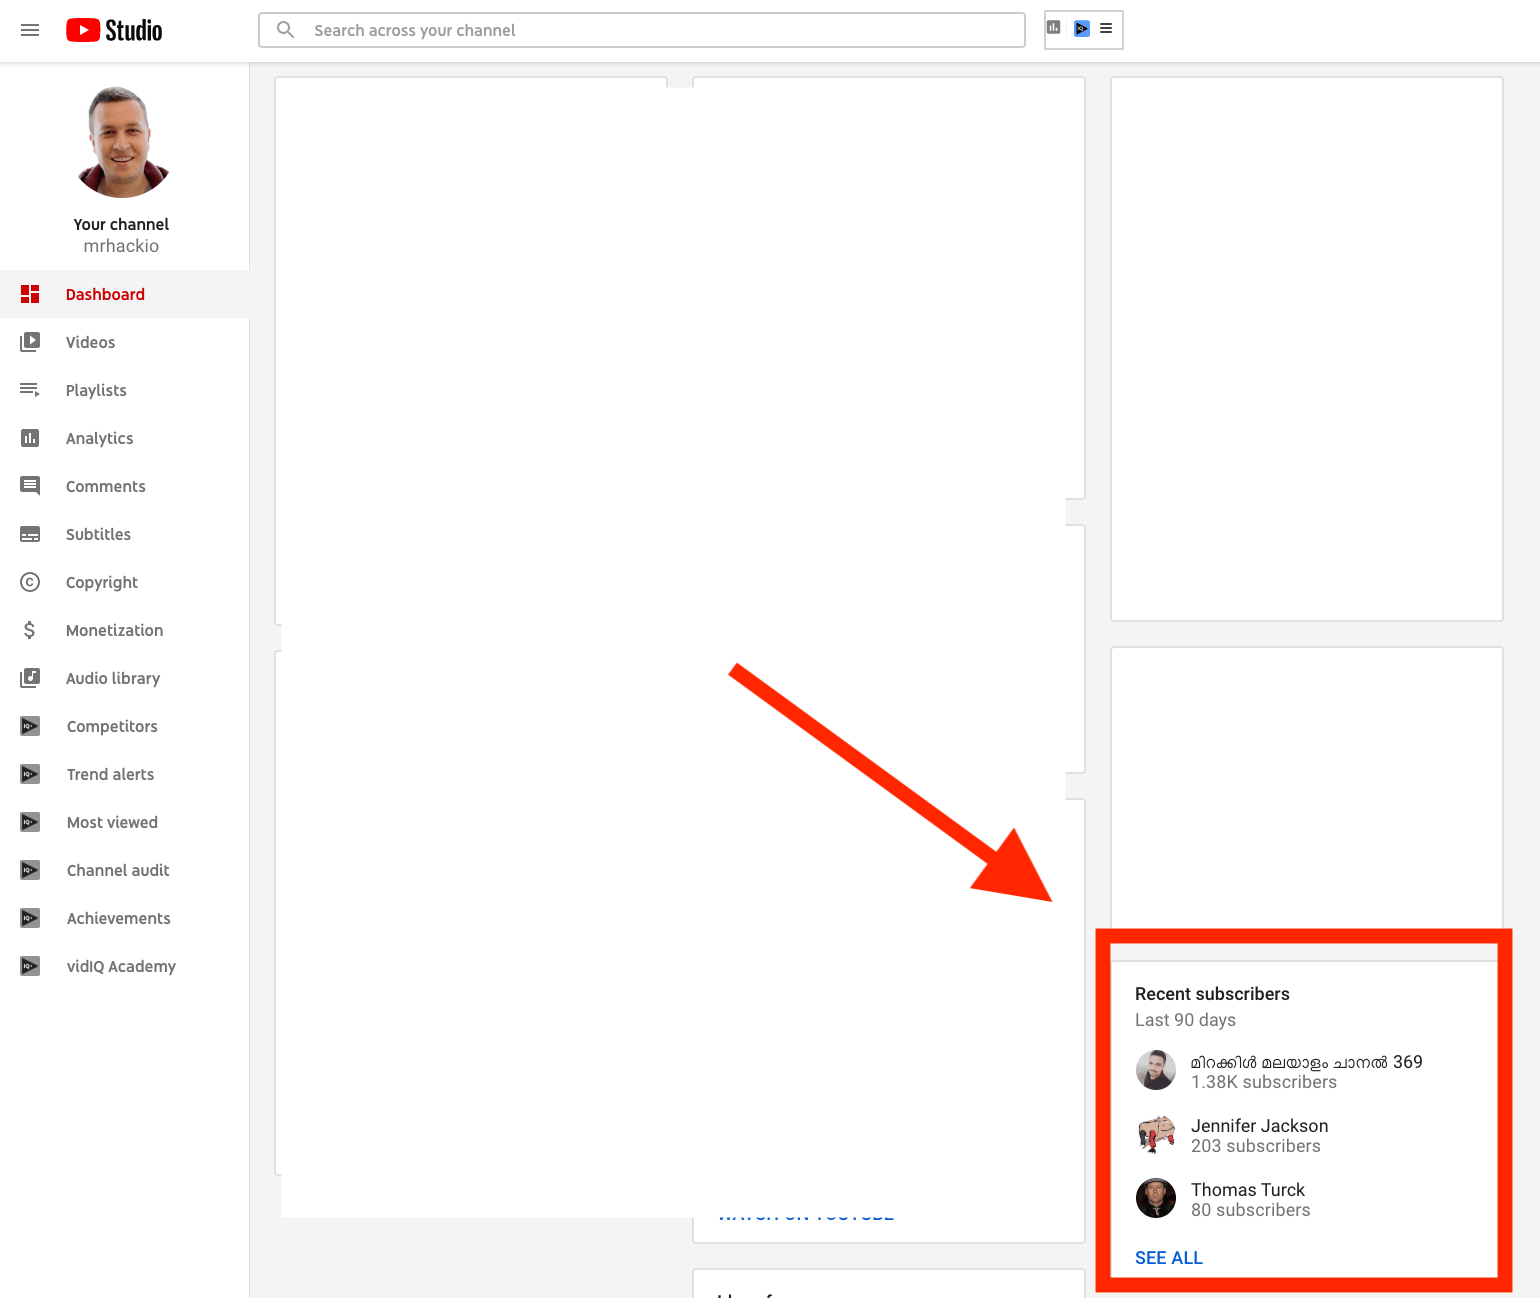 How to see who subscribed to you on Youtube